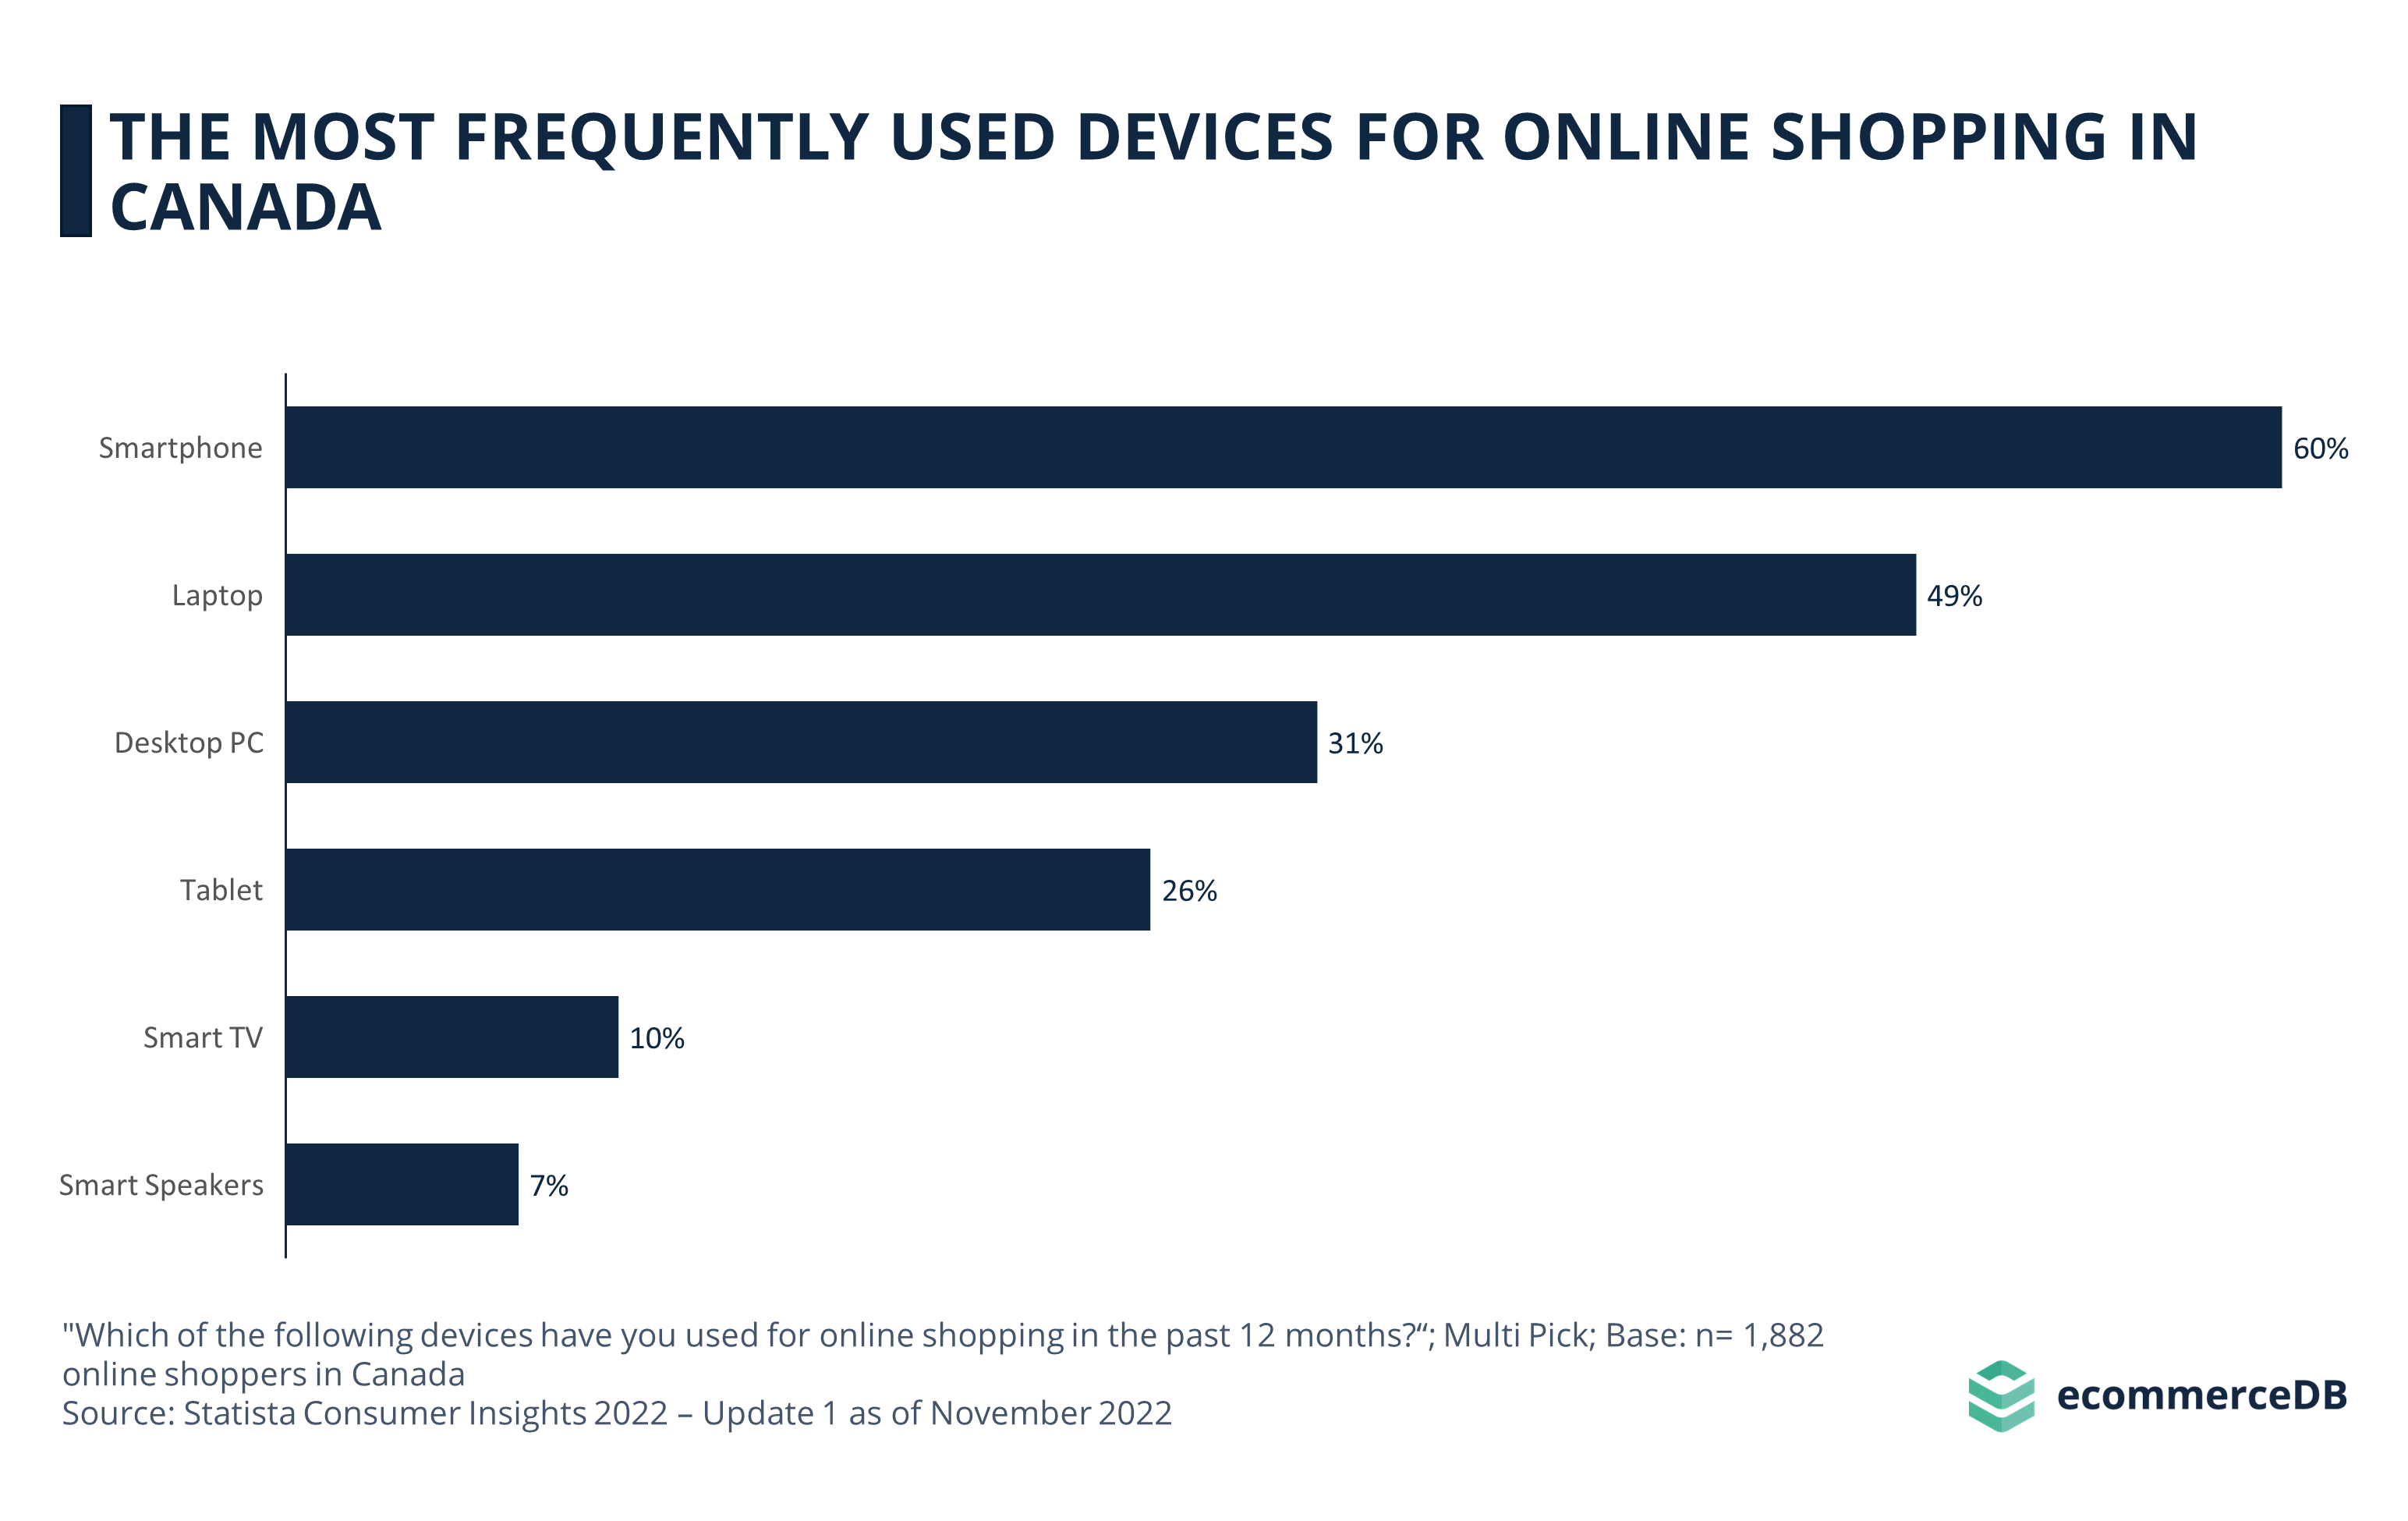 The Most Frequently Used Devices for Onlne Shopping in Canada